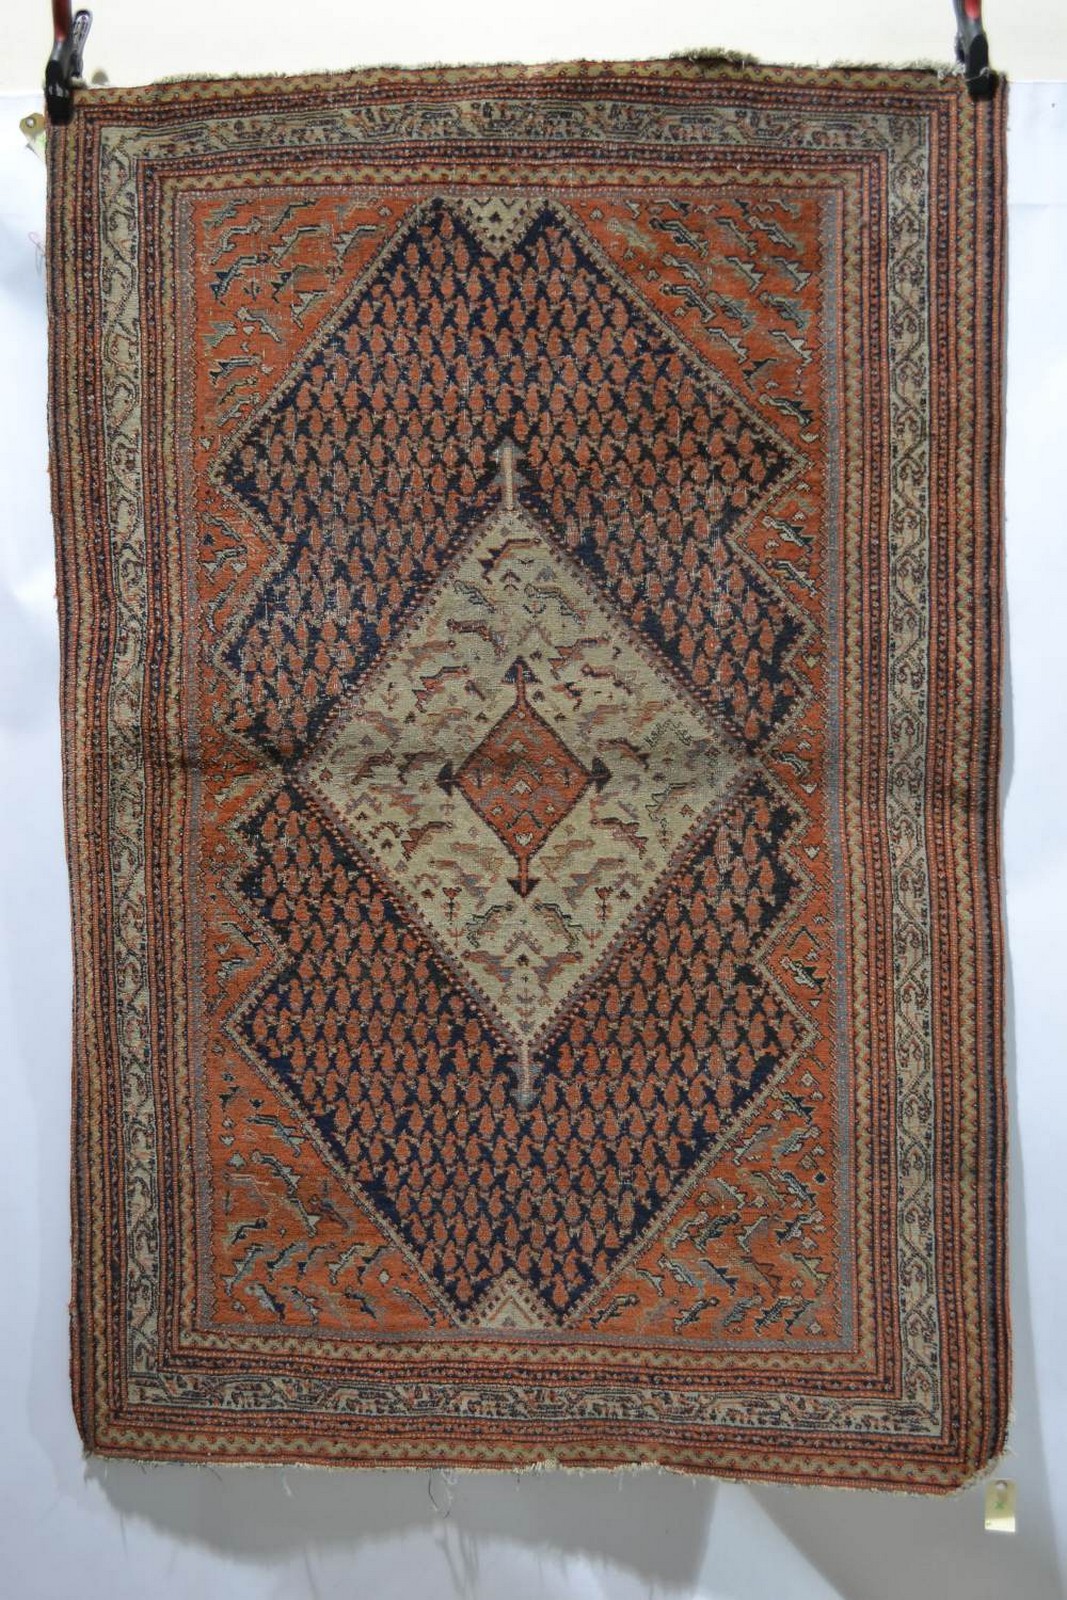 Seraband long rug, north west Persia, circa 1920, 9ft. x 3ft. 6in. 2.75m. x 1.07m. Overall wear with - Image 2 of 2